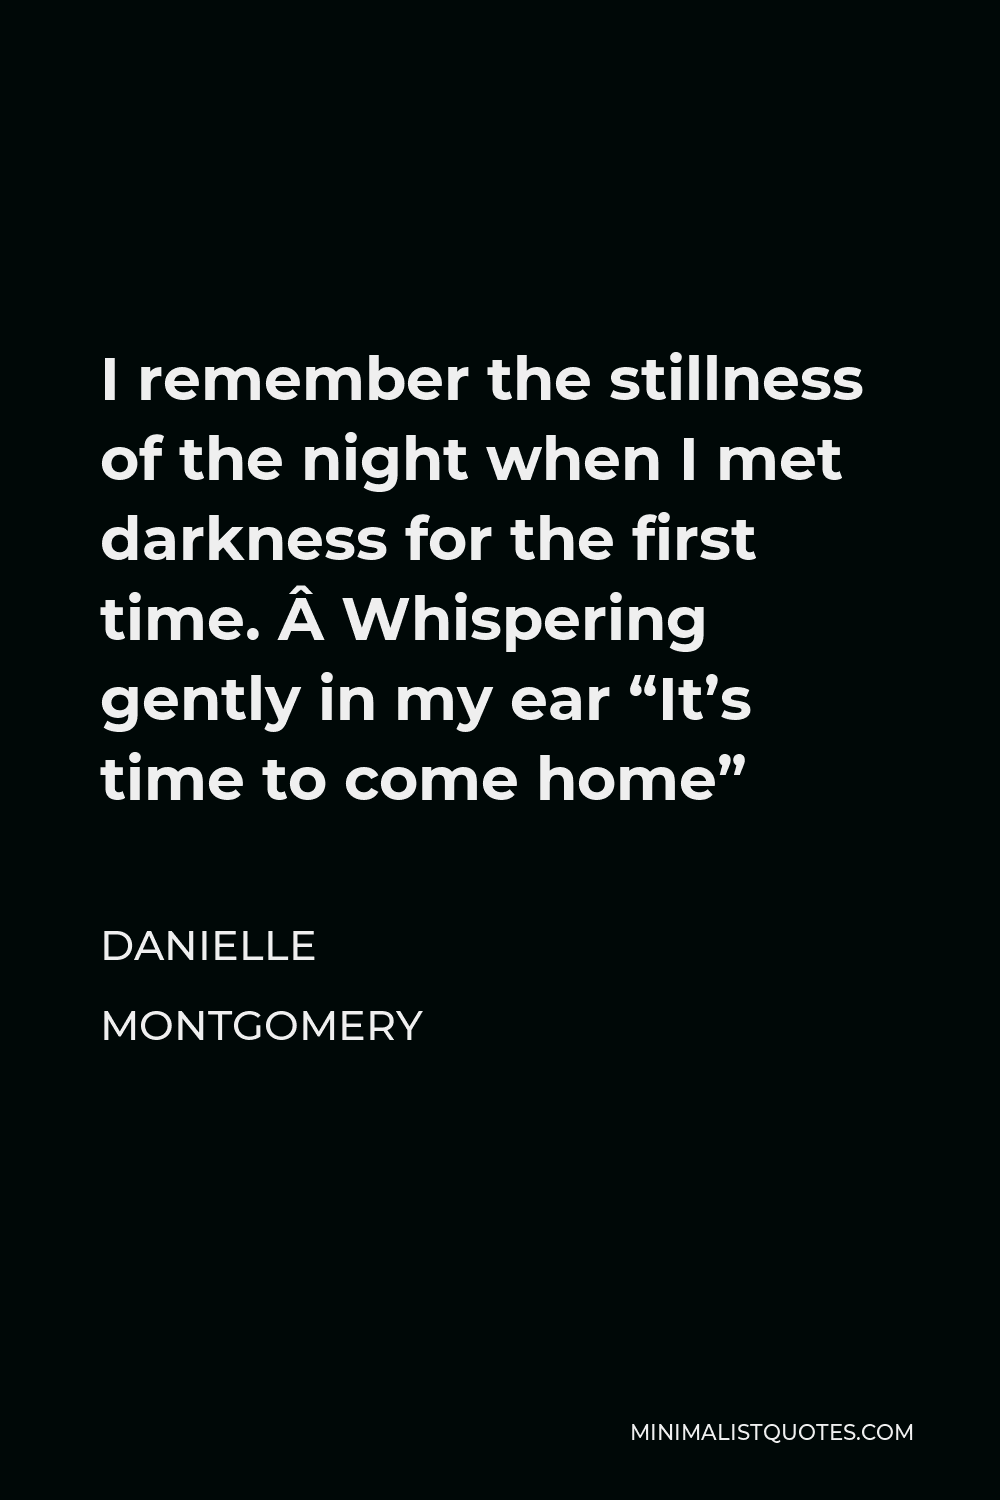 Danielle Montgomery Quote - I remember the stillness of the night when I met darkness for the first time.  Whispering gently in my ear “It’s time to come home”